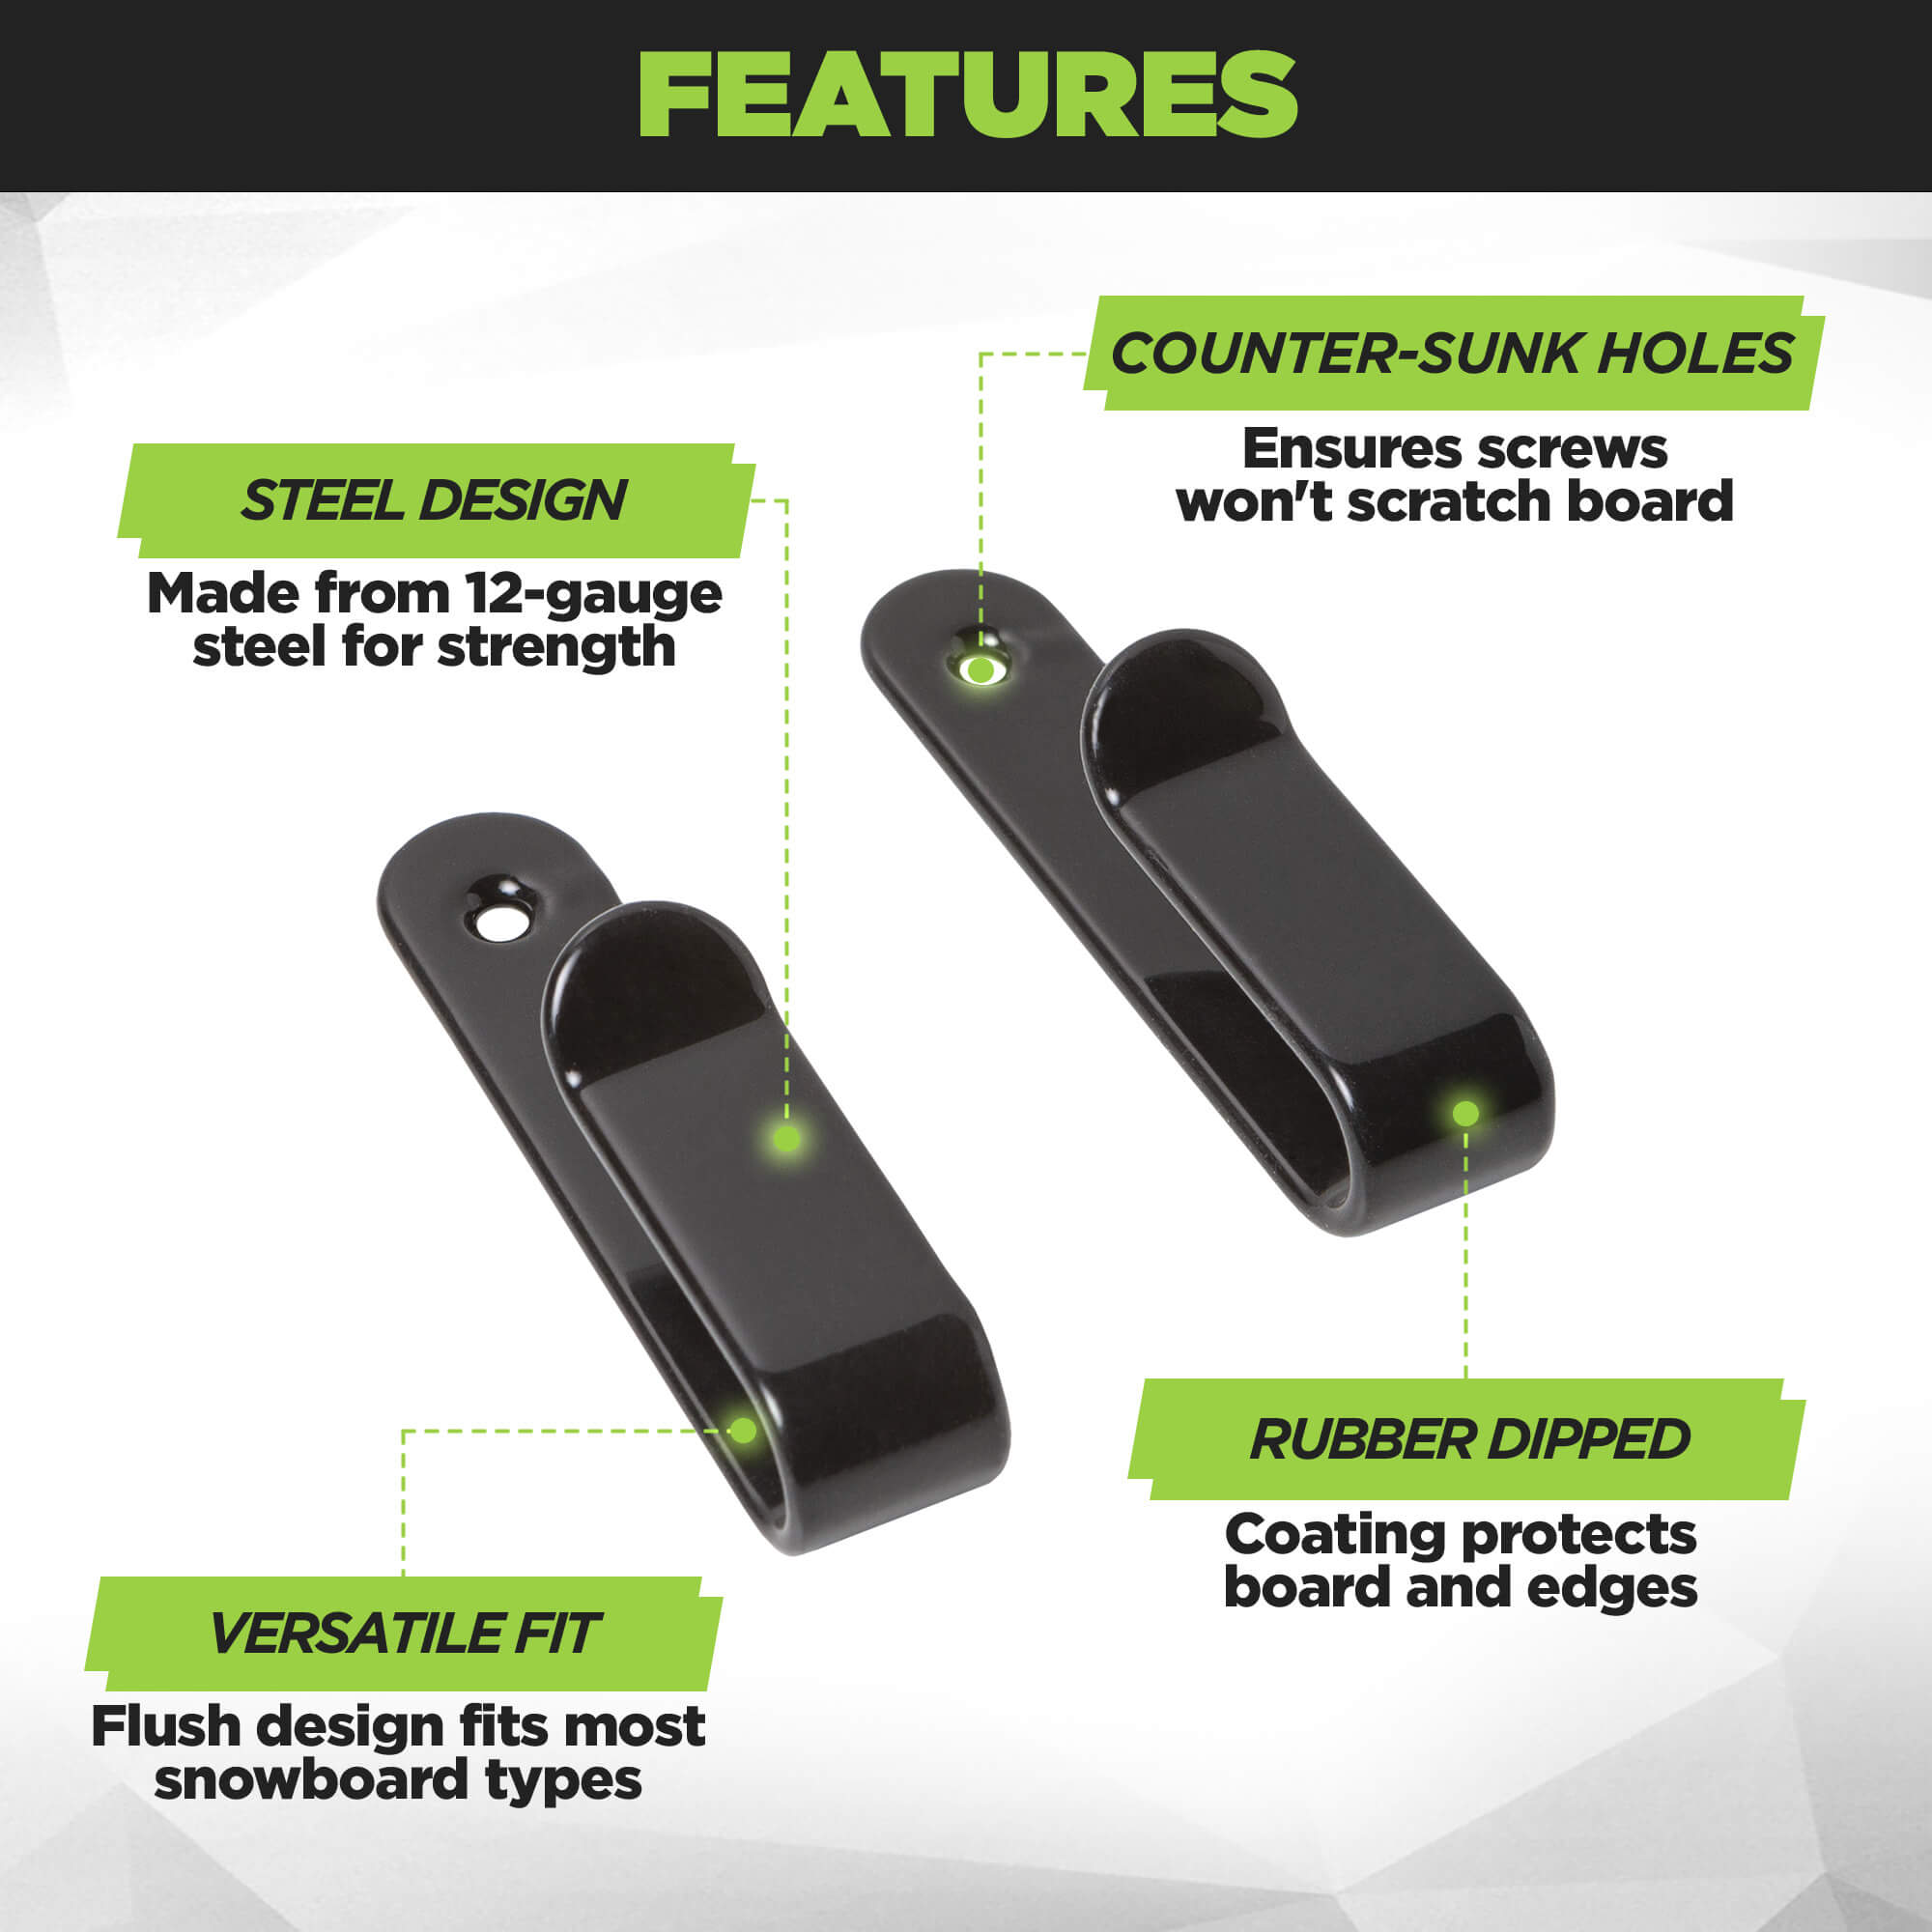 The HIDEit Horizontal Snowboard Mount Clips are made from 12-gauge steel for added strength and durability.